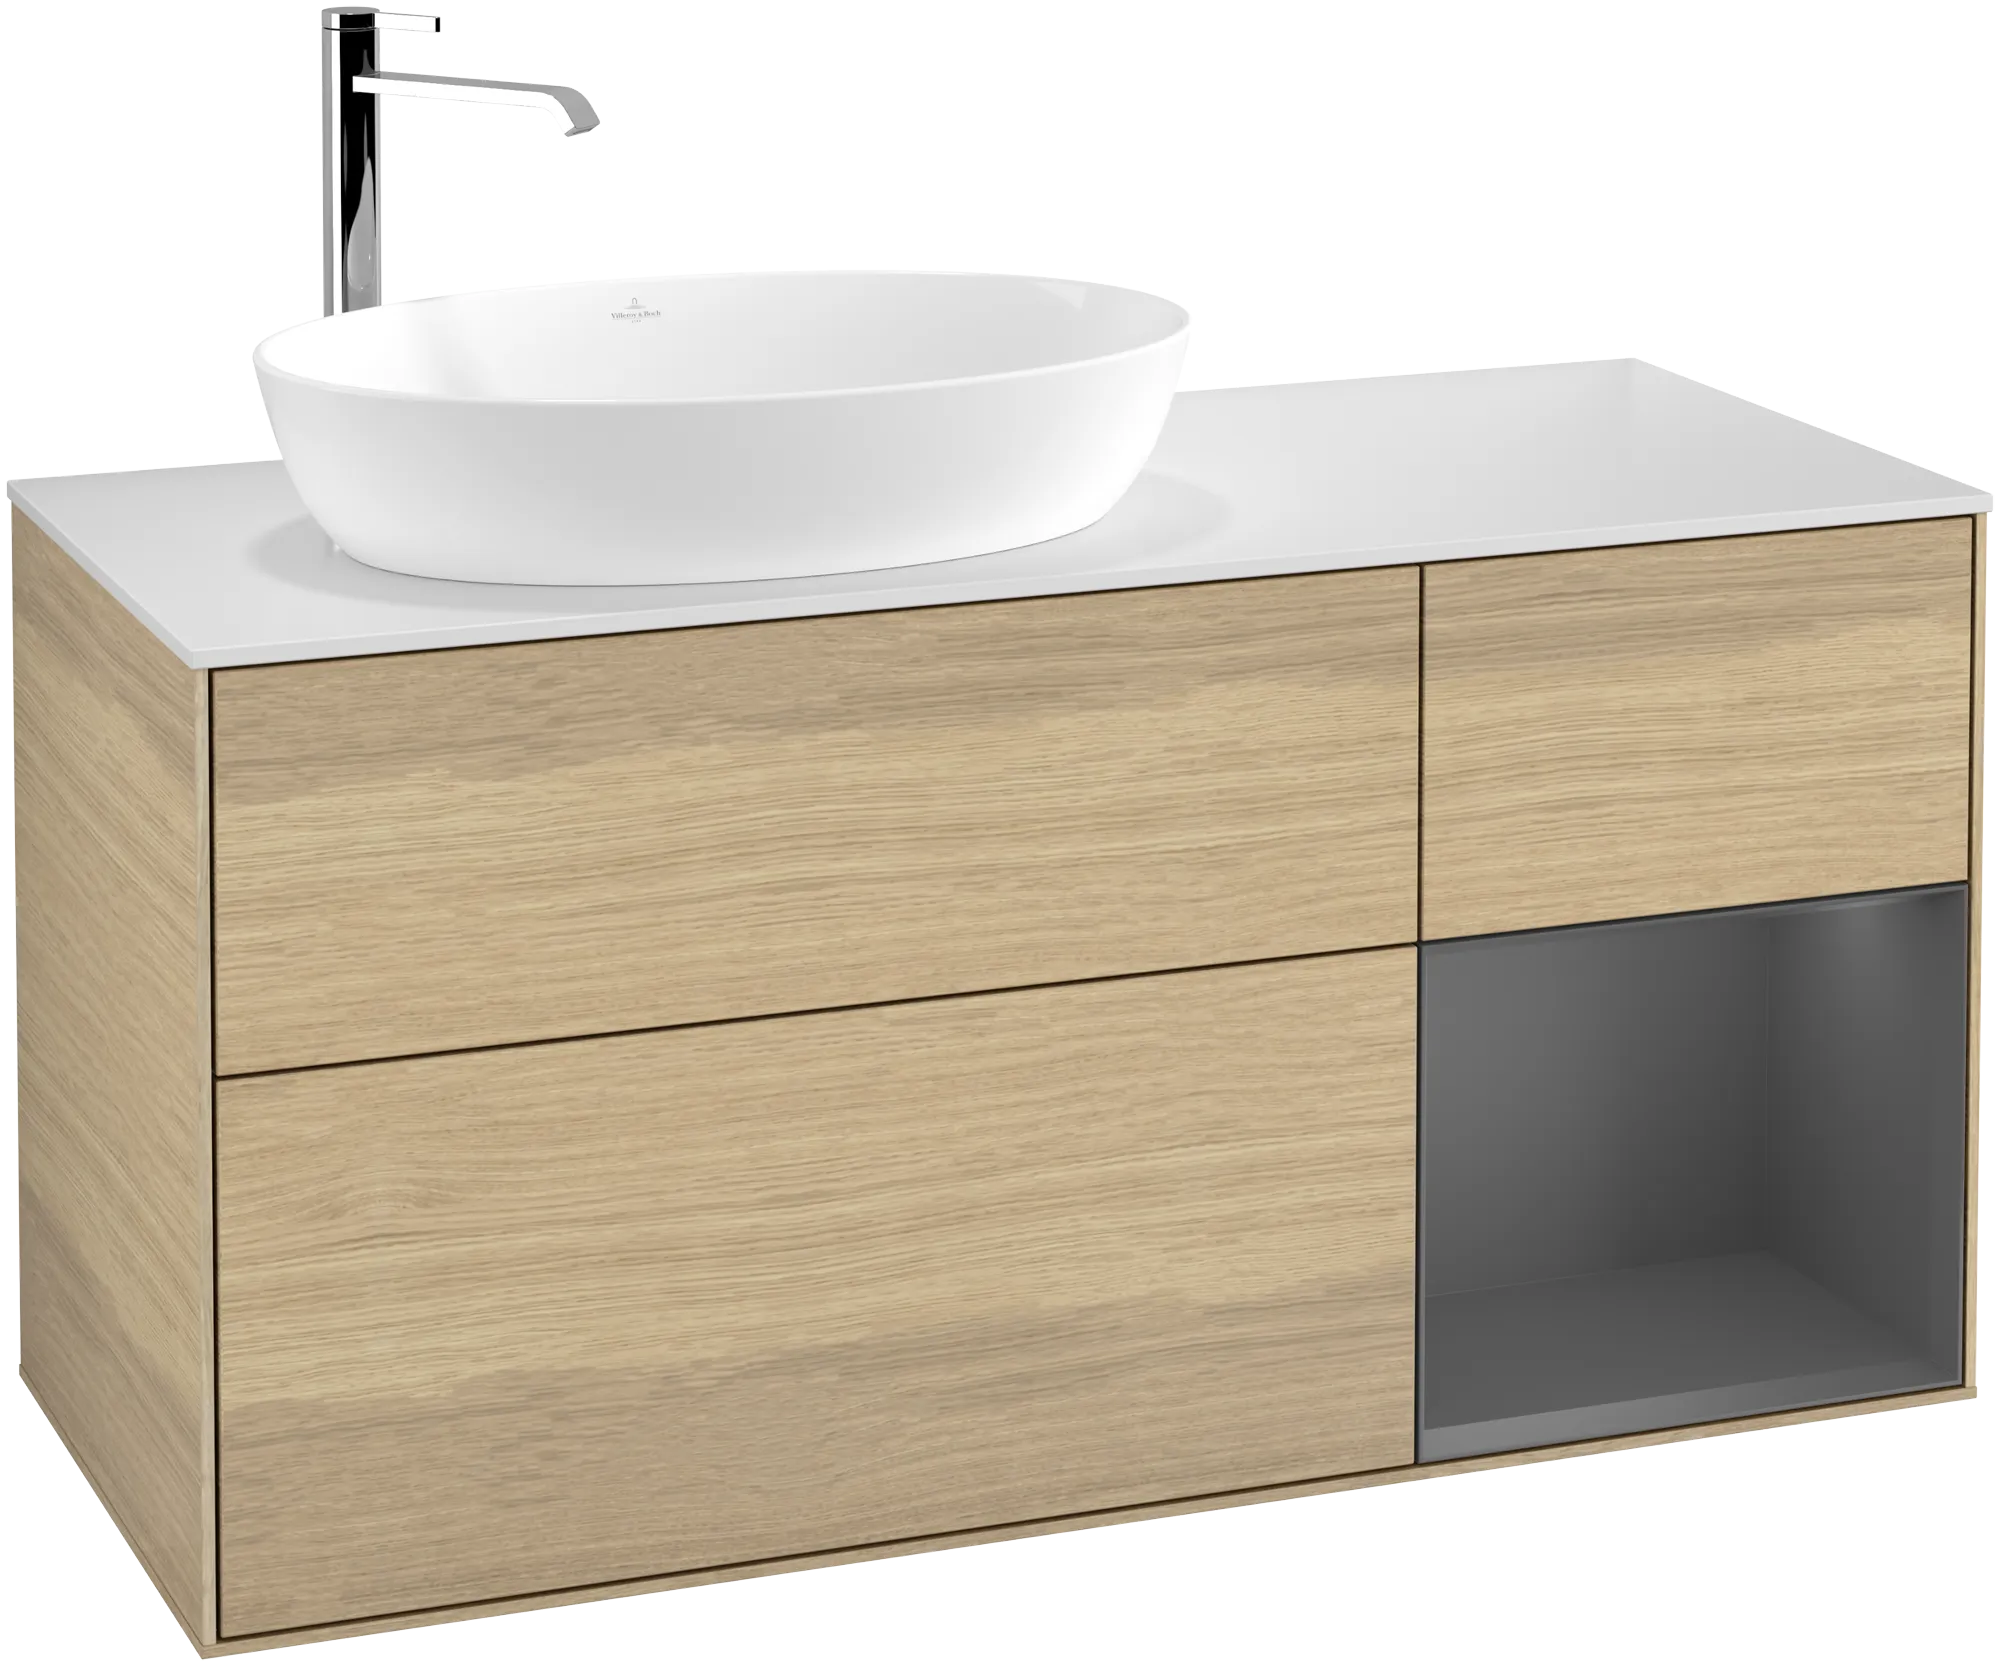 VILLEROY BOCH Finion Vanity unit, with lighting, 3 pull-out compartments, 1200 x 603 x 501 mm, Oak Veneer / Anthracite Matt Lacquer / Glass White Matt #G931GKPC resmi